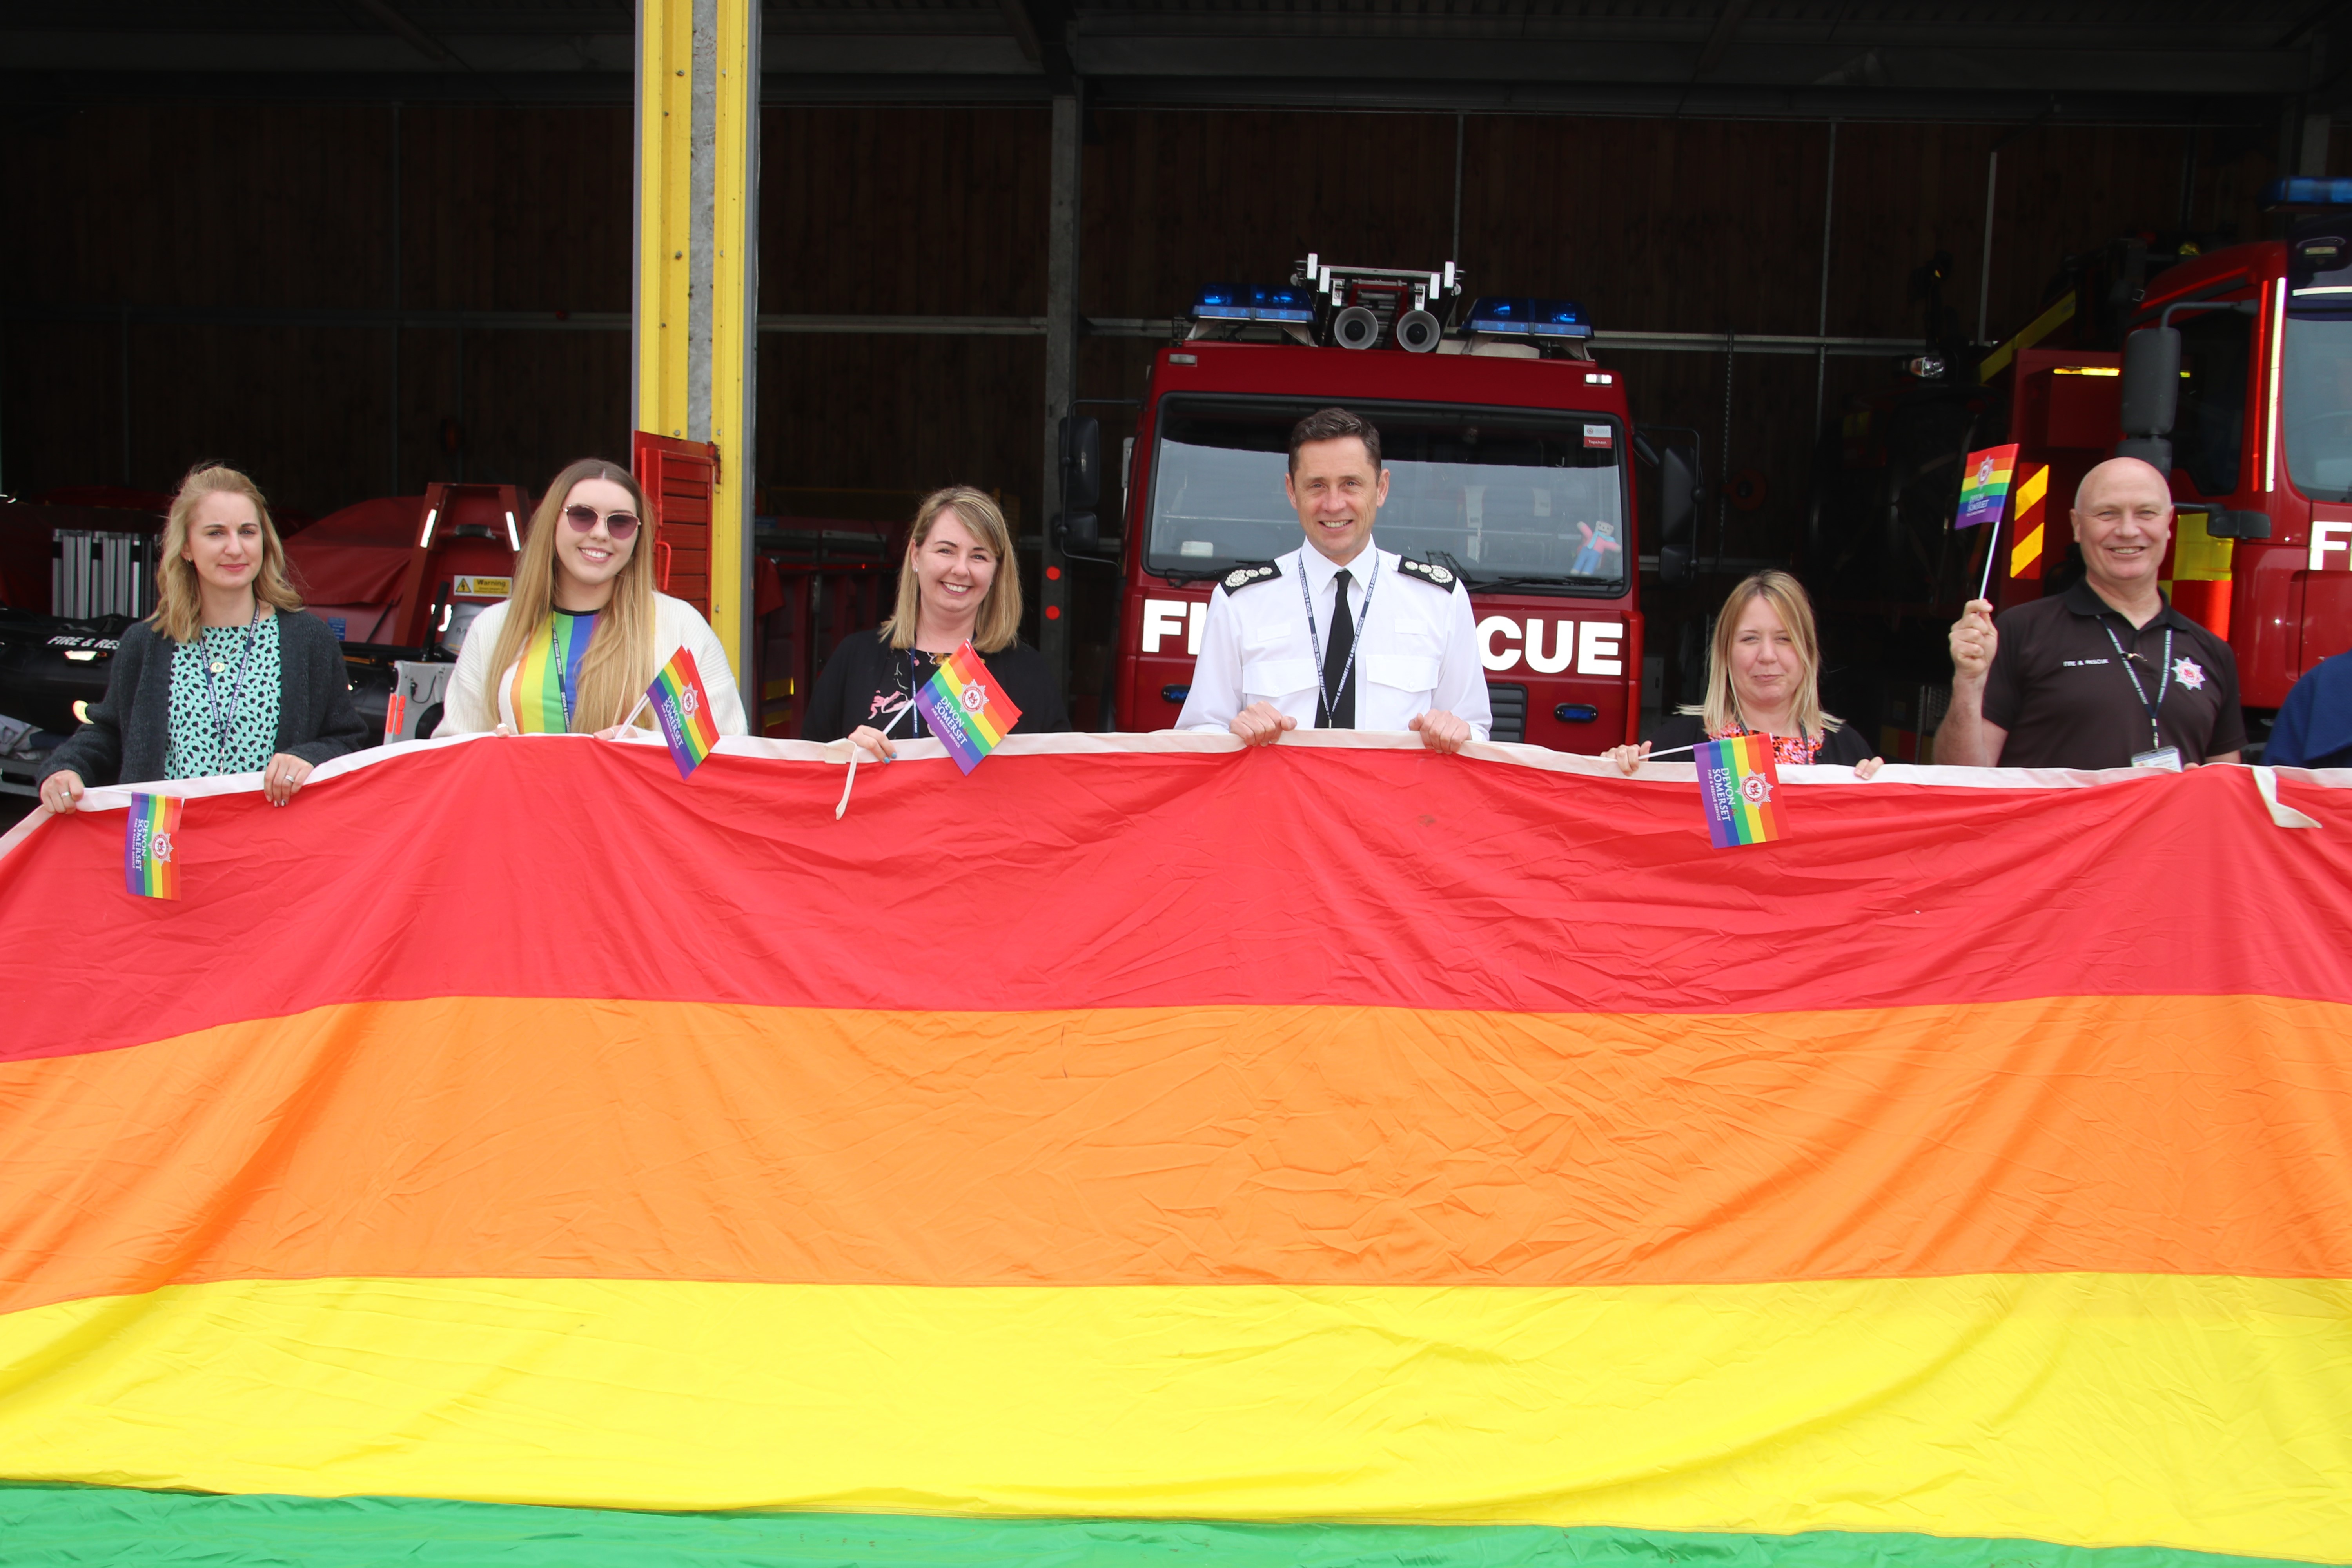 The Chief Fire Officer and colleagues with the flag